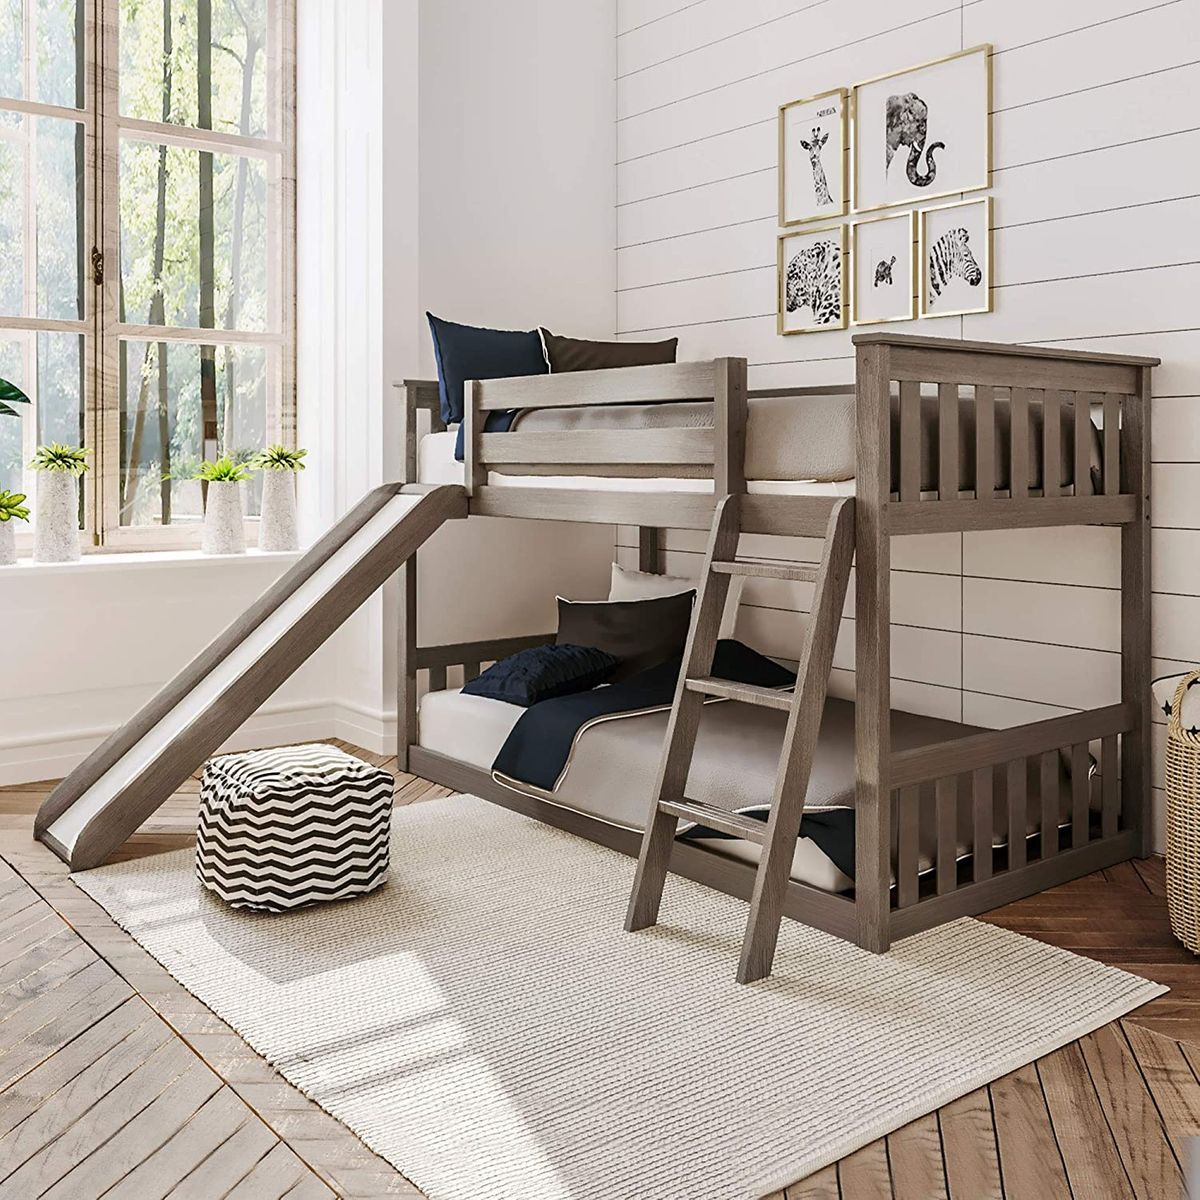 8 Best Bunk Beds 2020 The Strategist, Bunk Beds That Convert To Twin Beds